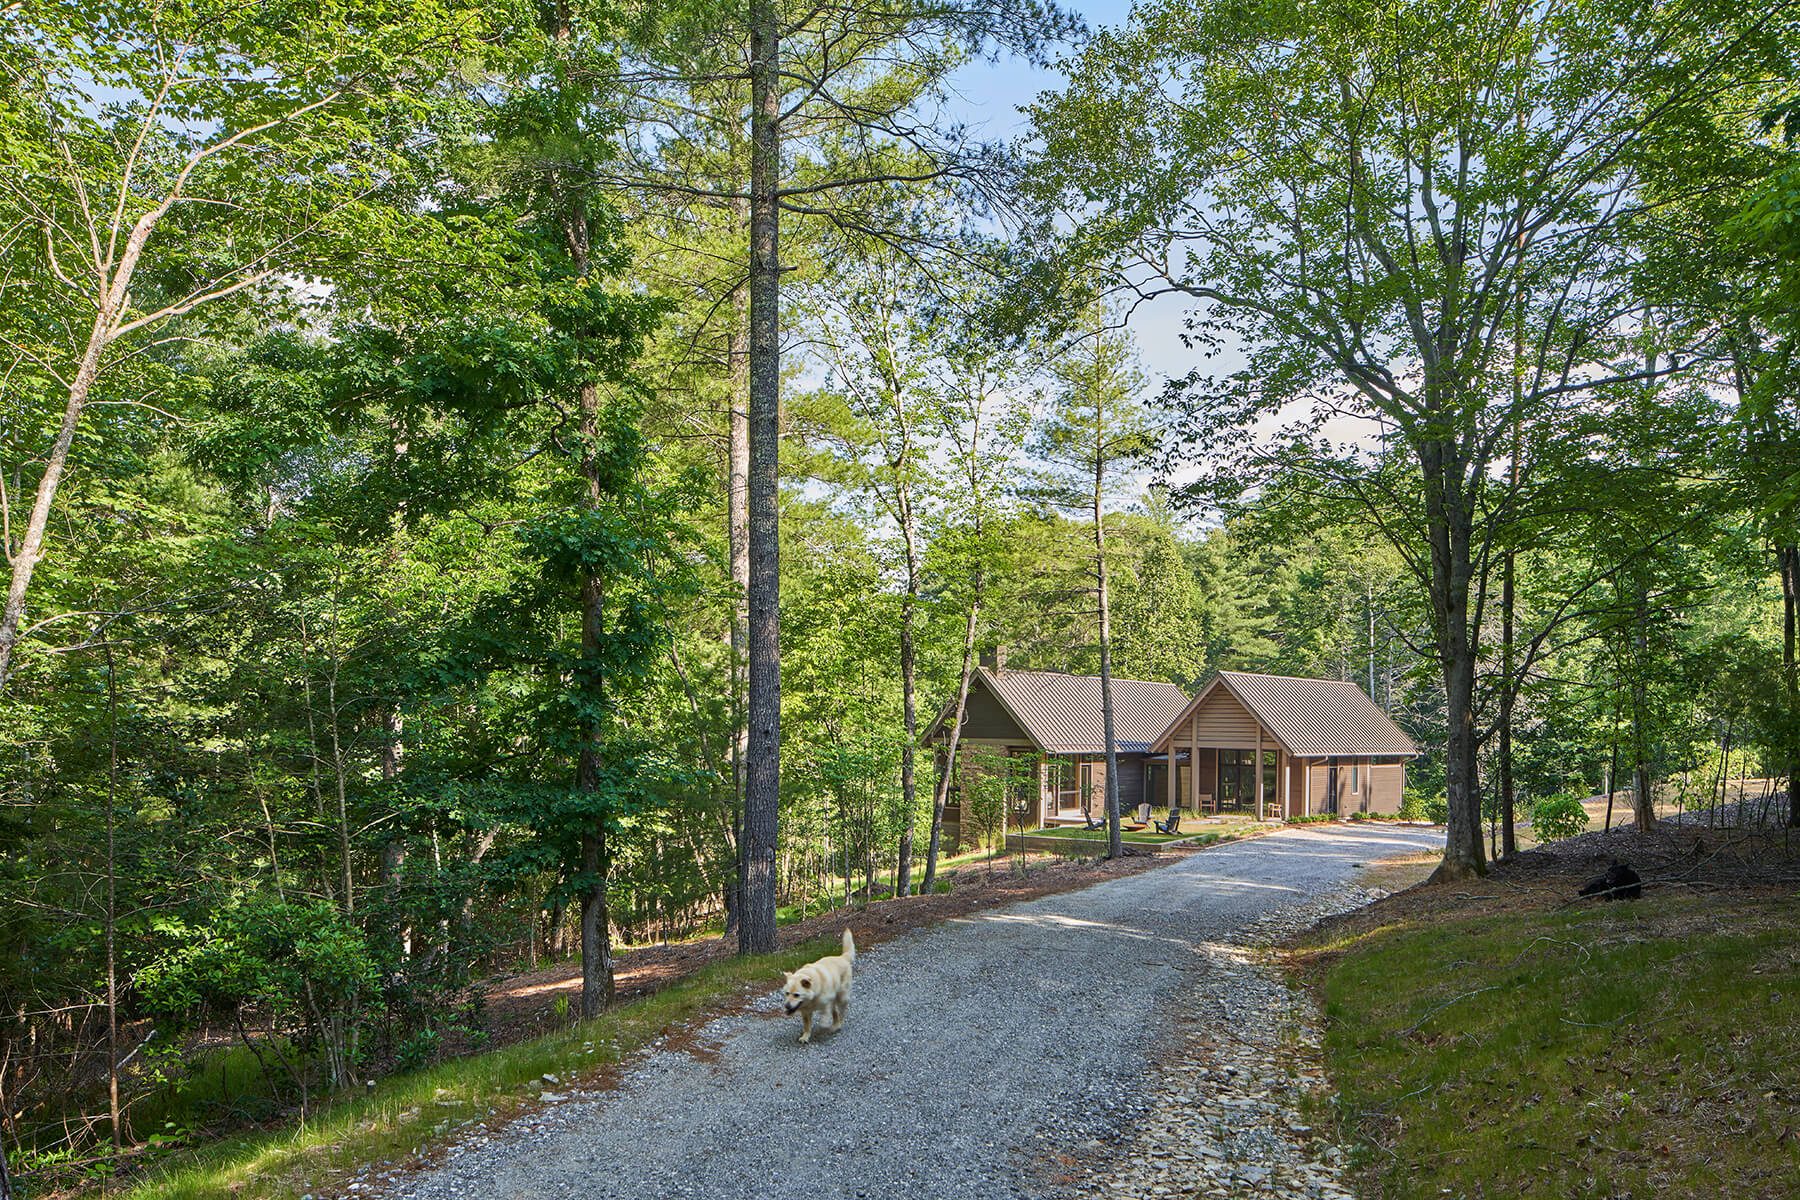 The Camp Campos home exterior and driveway architectural home design in Western North Carolina